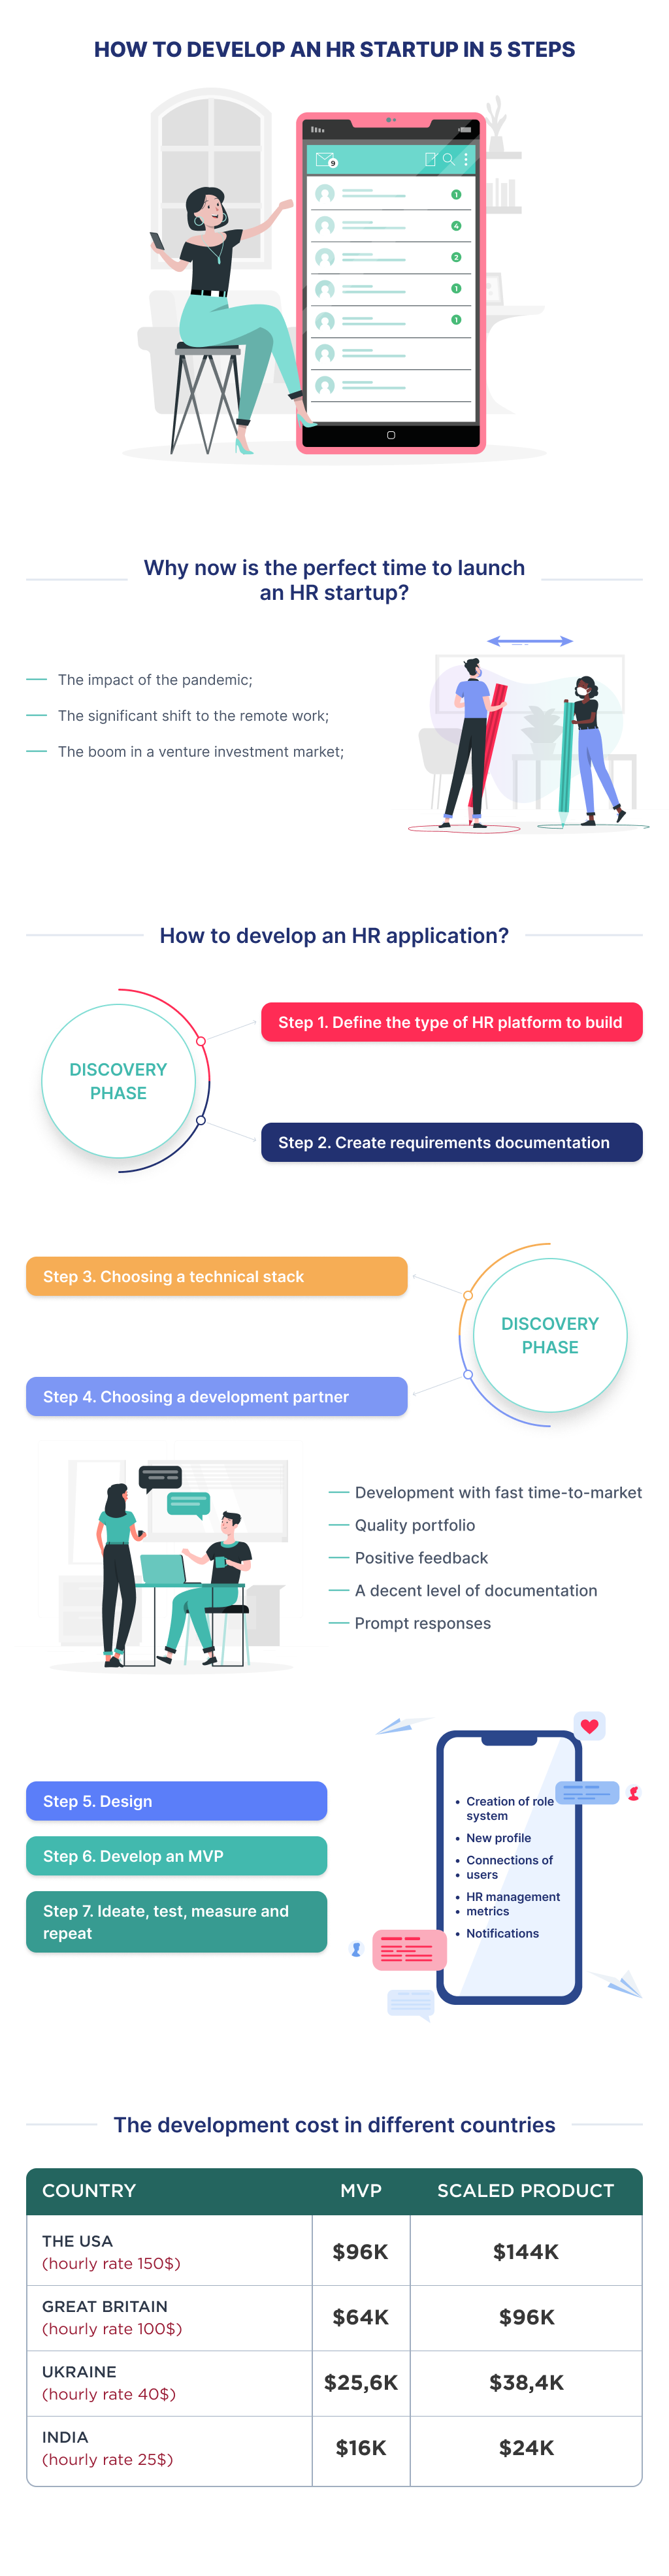 This infographic explains how to launch an HR application in 5 simple steps, from generating and validating an idea to developing and launching the app.